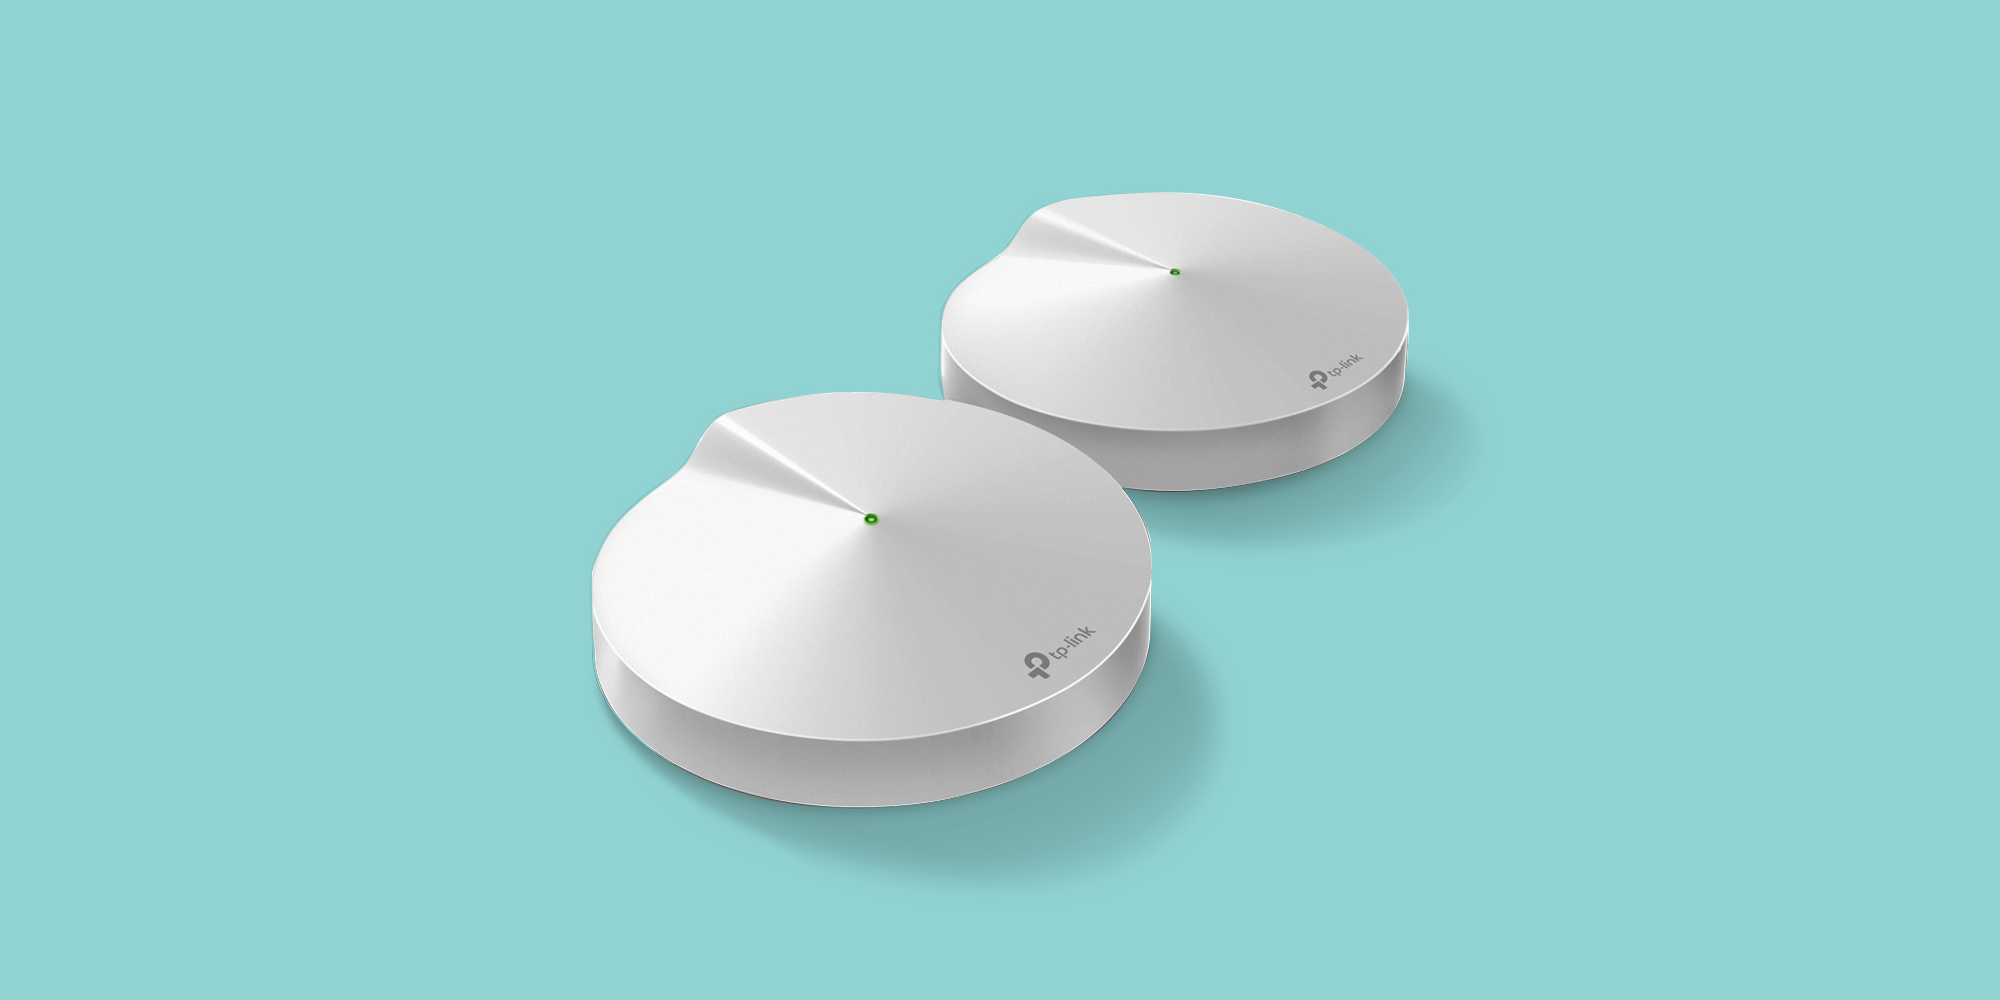 The Mesh Routers 2022 - Mesh WiFi